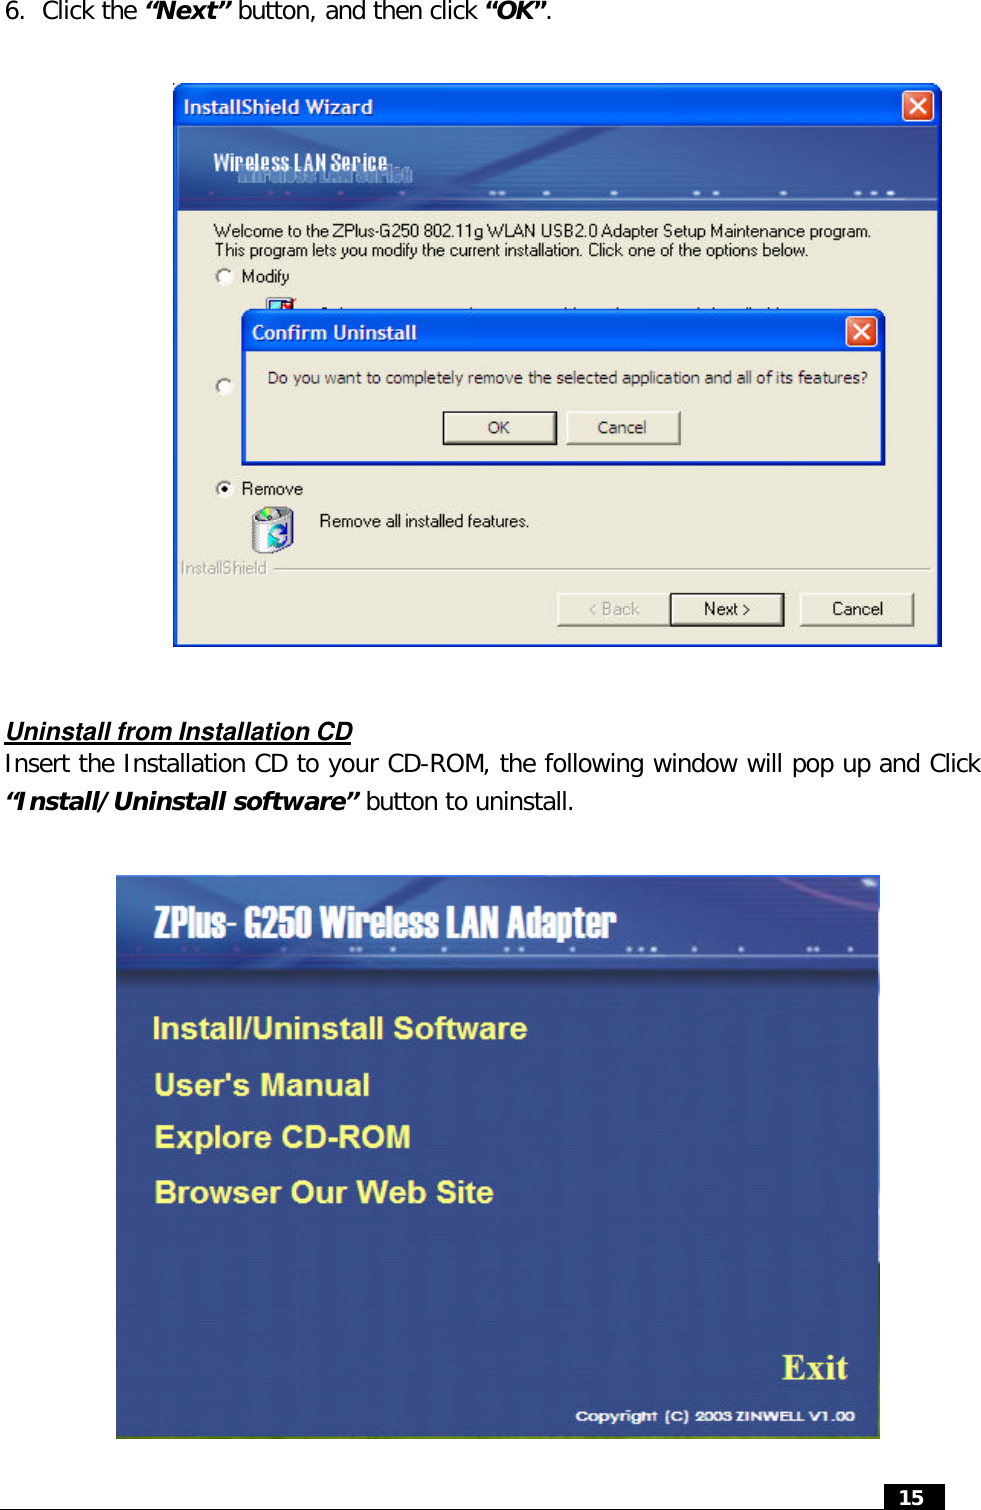  15  6. Click the “Next” button, and then click “OK”.                   Uninstall from Installation CD Insert the Installation CD to your CD-ROM, the following window will pop up and Click “Install/Uninstall software” button to uninstall.                  